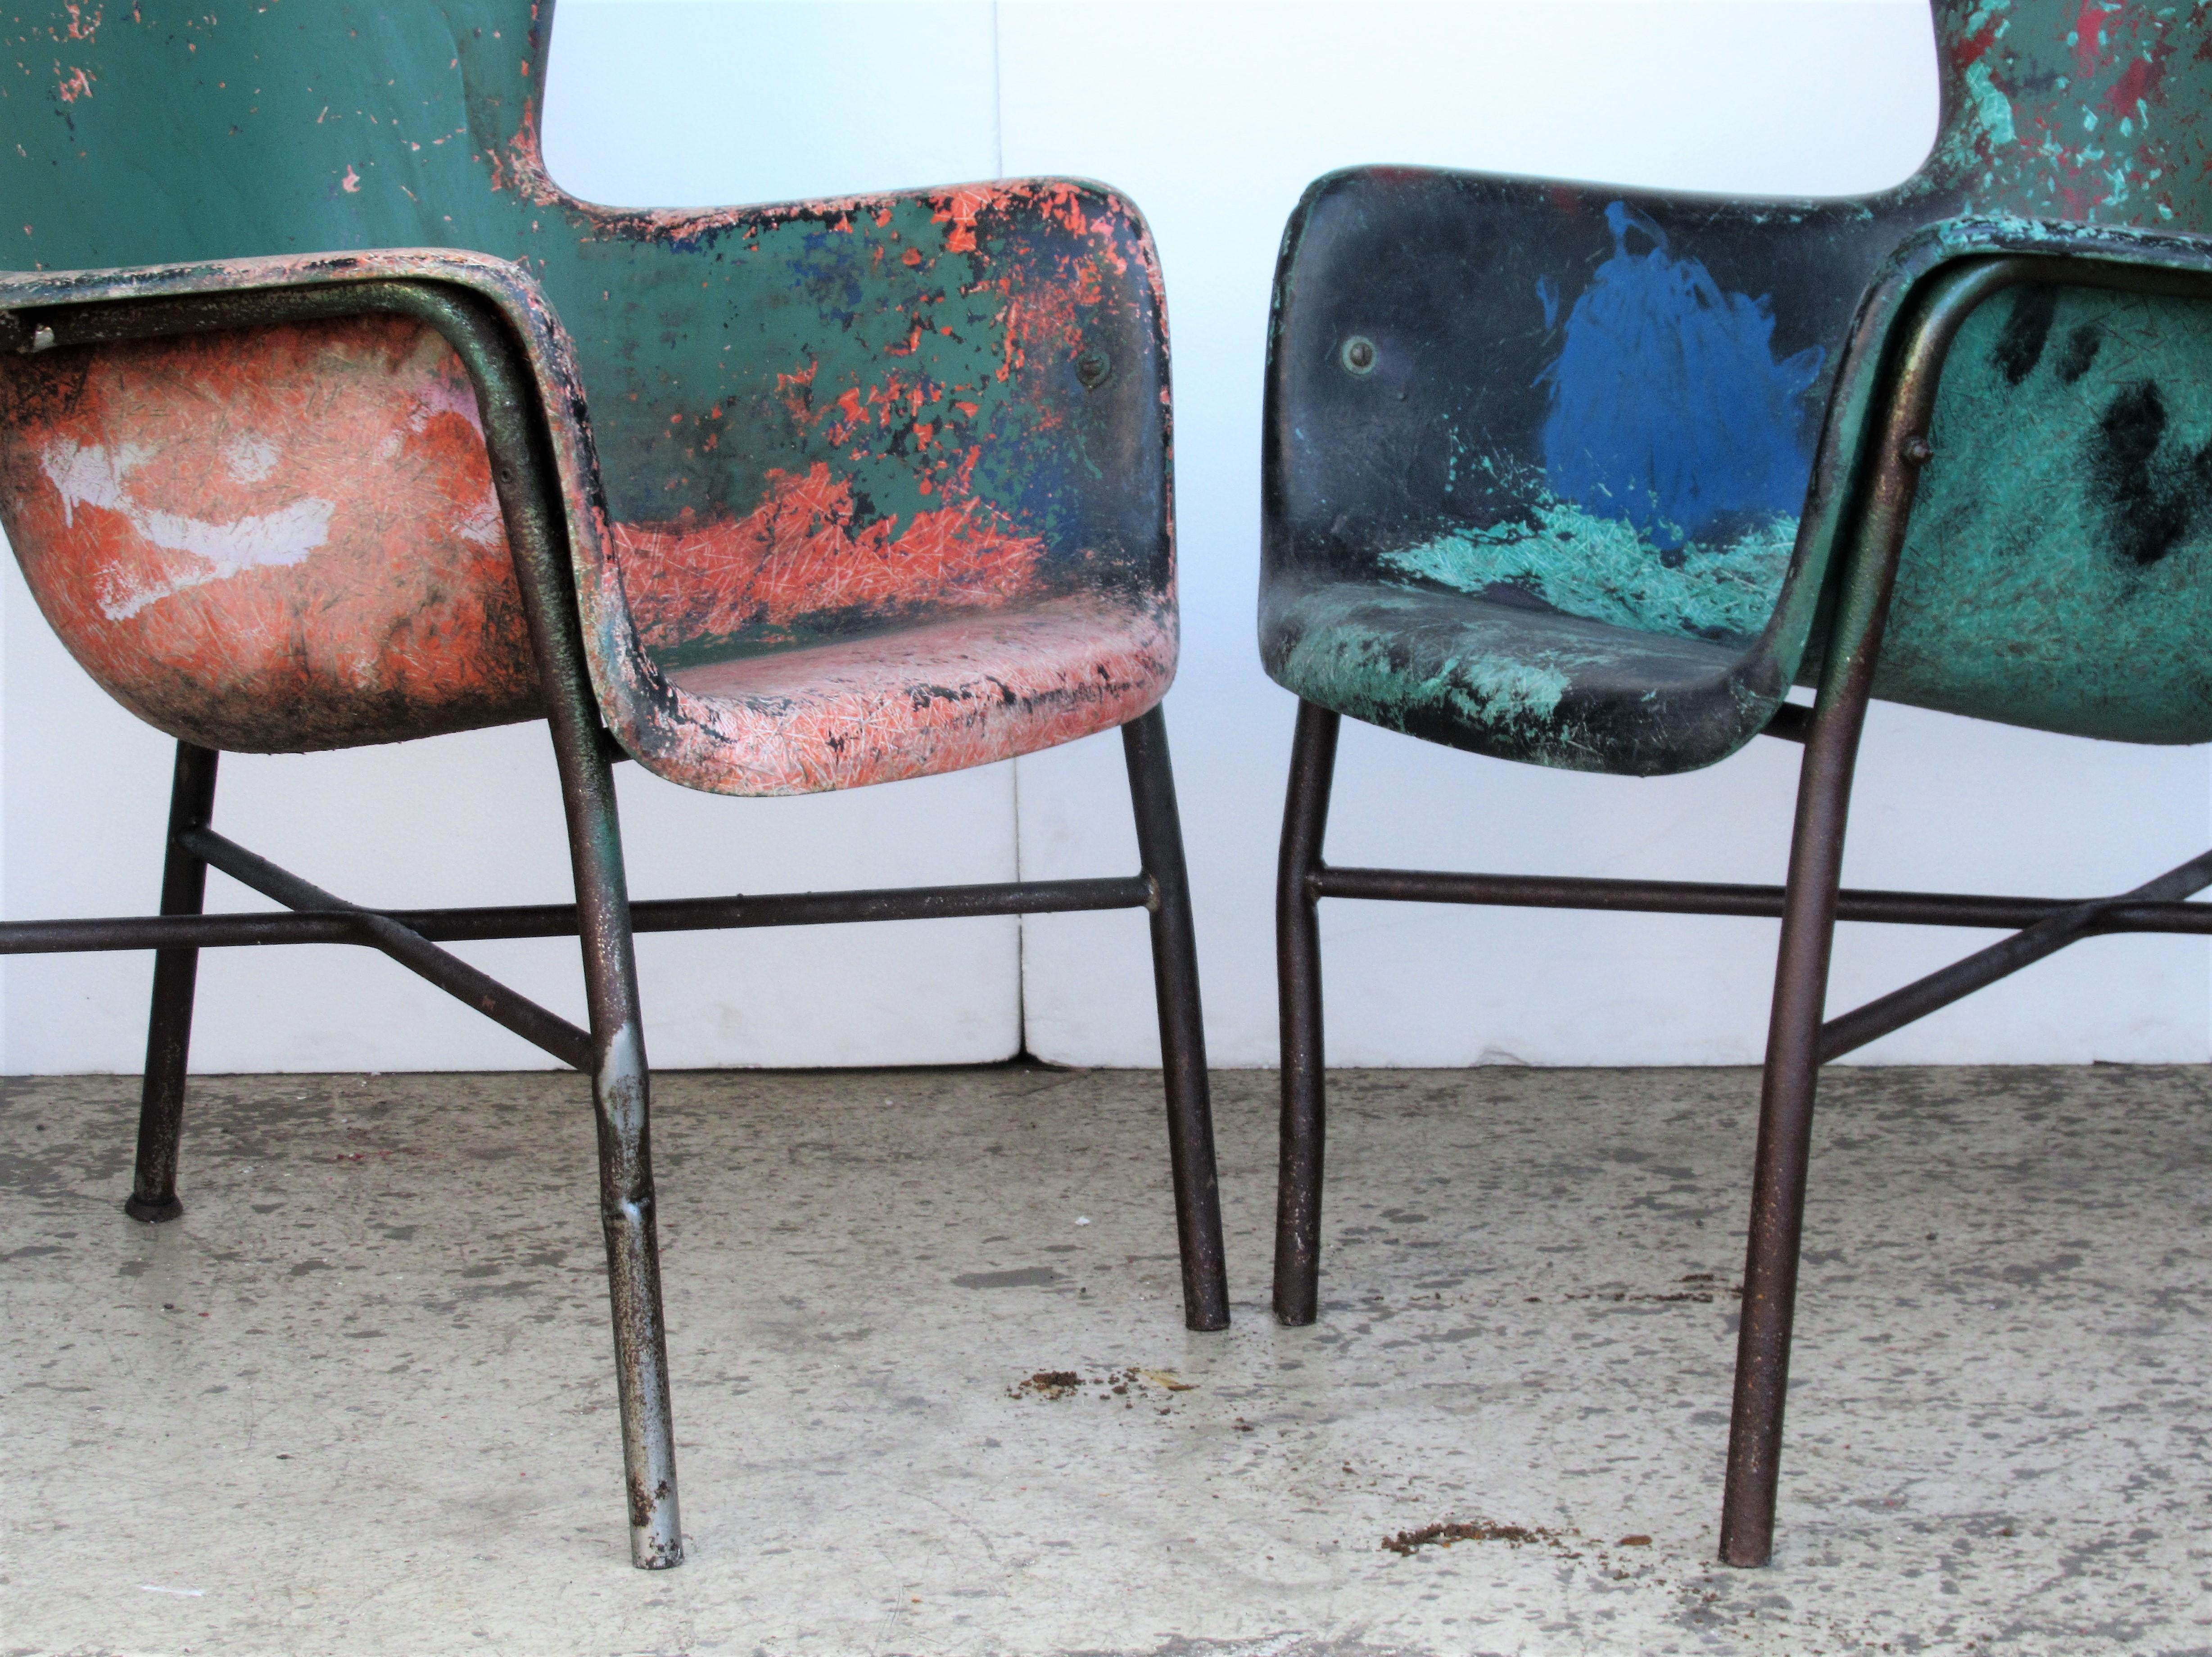 1950s fiberglass wing chairs with tubular metal X bases by Lawrence Peabody in eye dazzling beautifully aged old worn artist pallet style painted surface. Great looking as found art furniture. See all pictures.